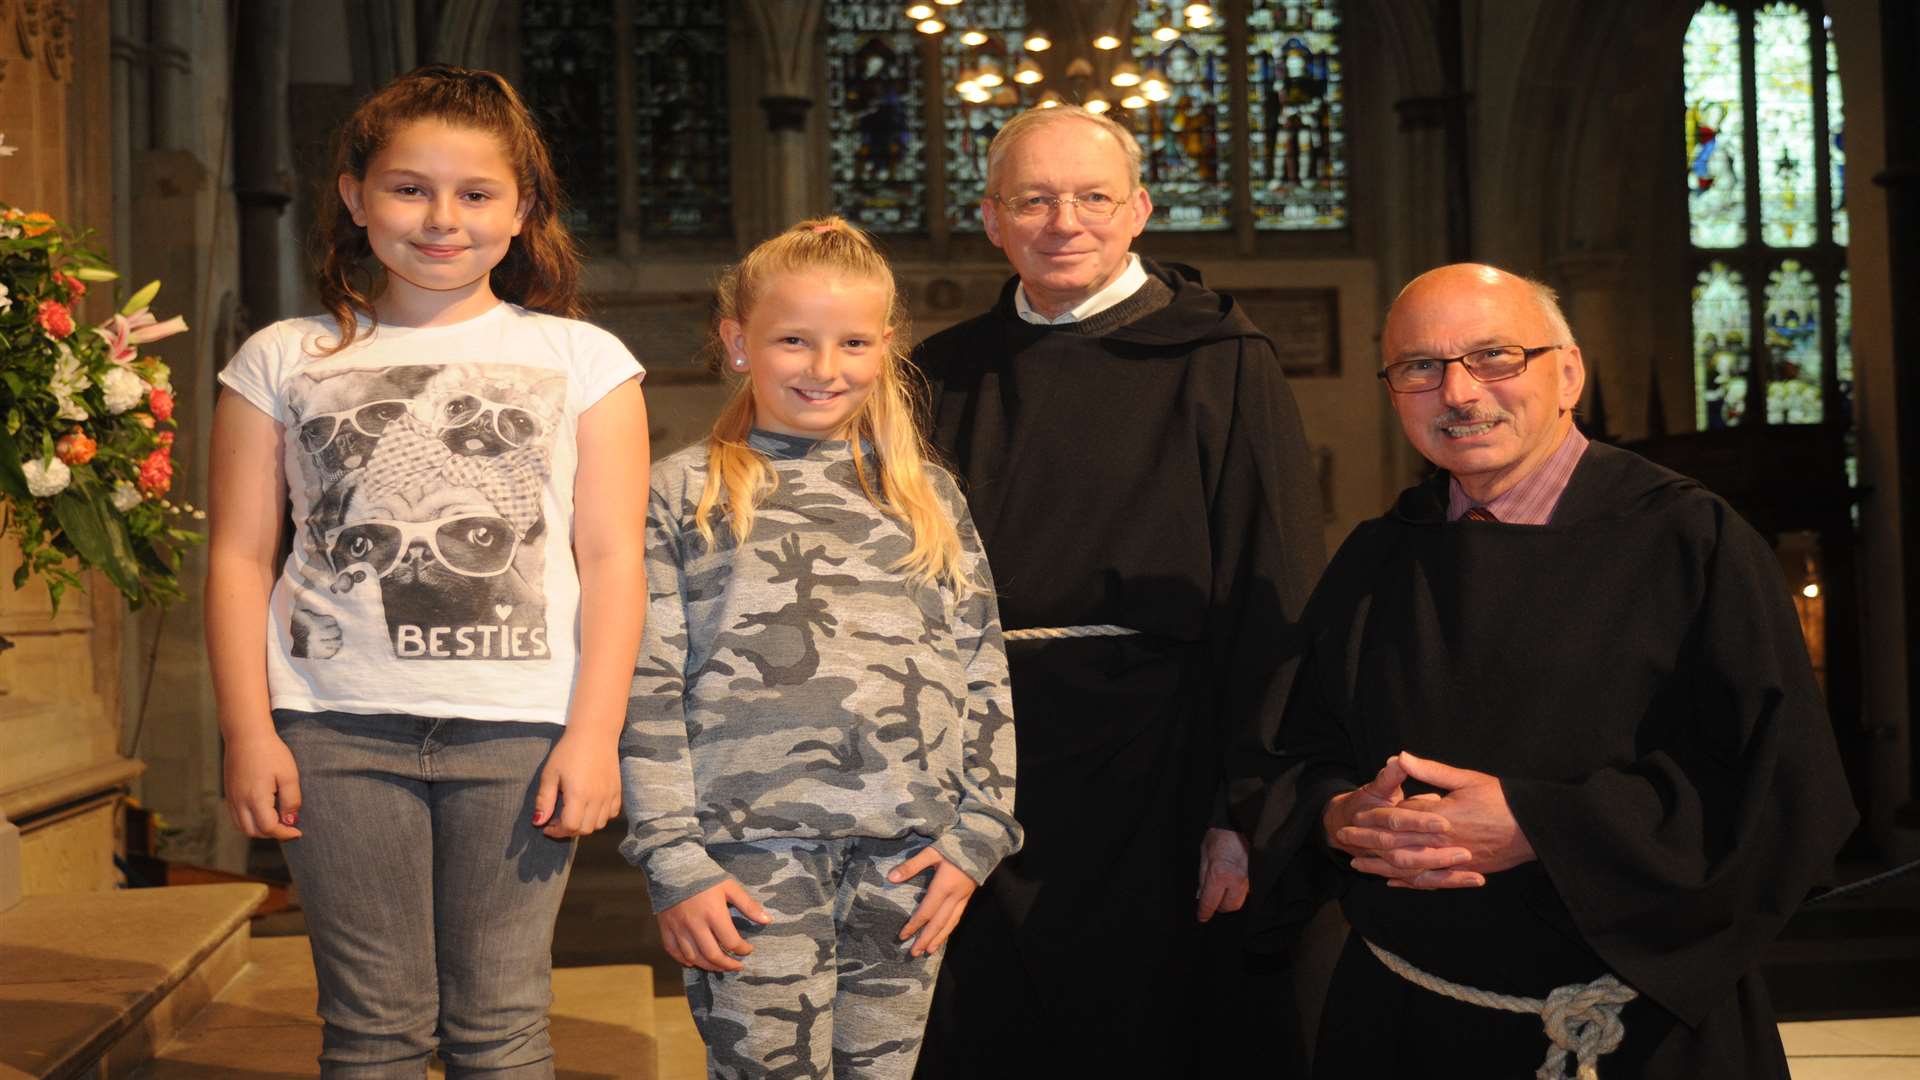 Cathedral volunteers Poppy Gillespie and Keira Popay, both 10, with Martin Dodsworth and Terry Wood